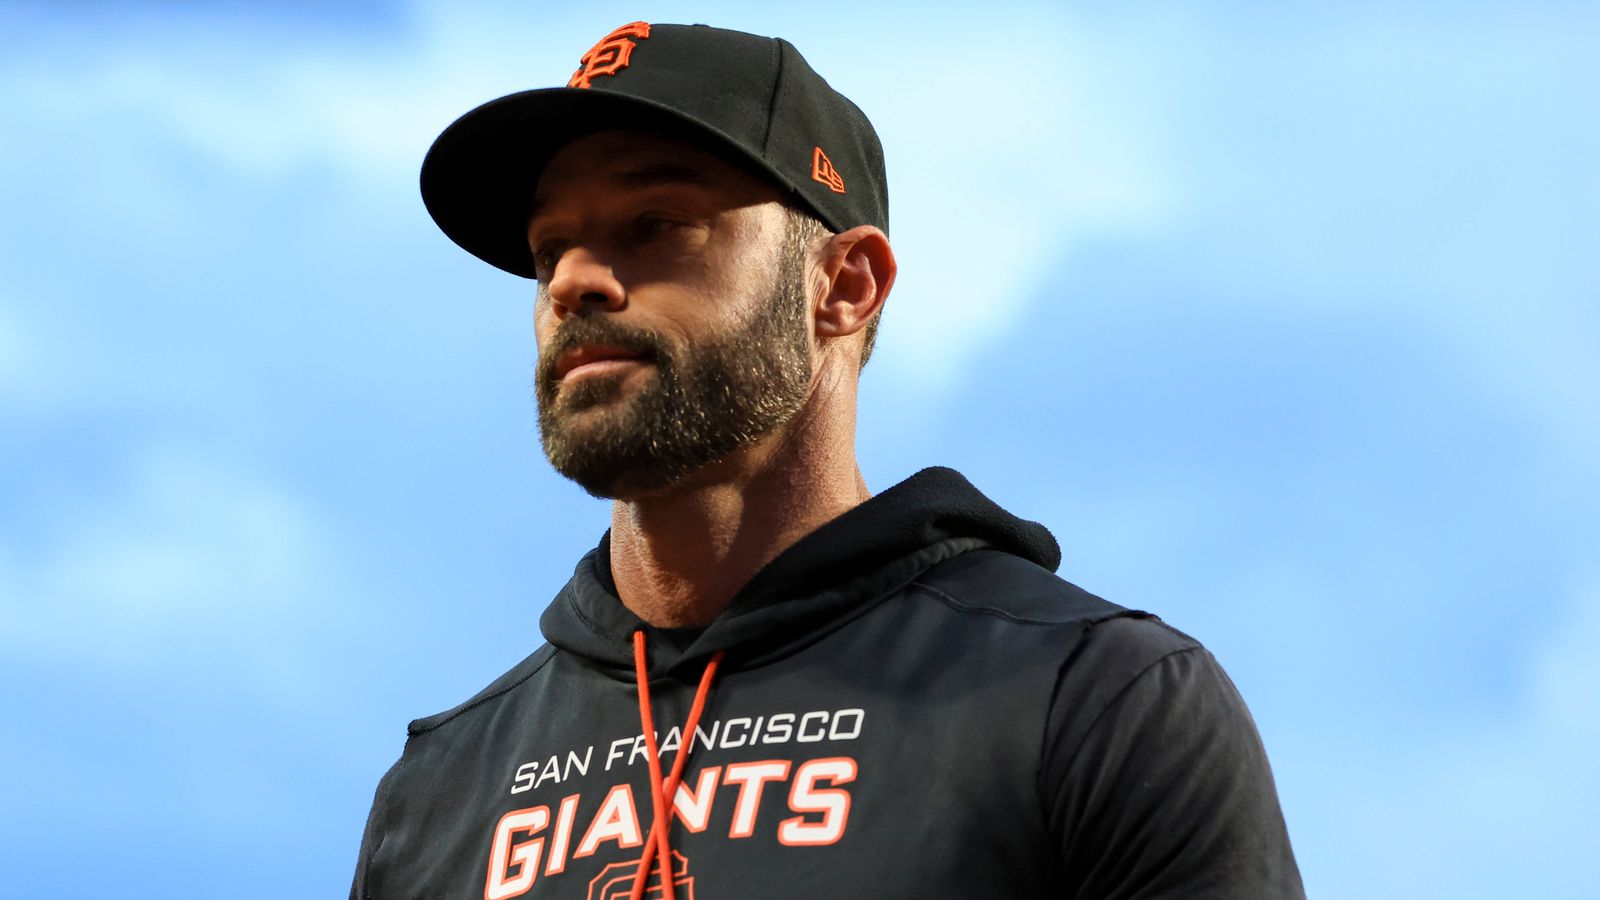 Giants manager Gabe Kapler's essay rips country after Uvalde shooting